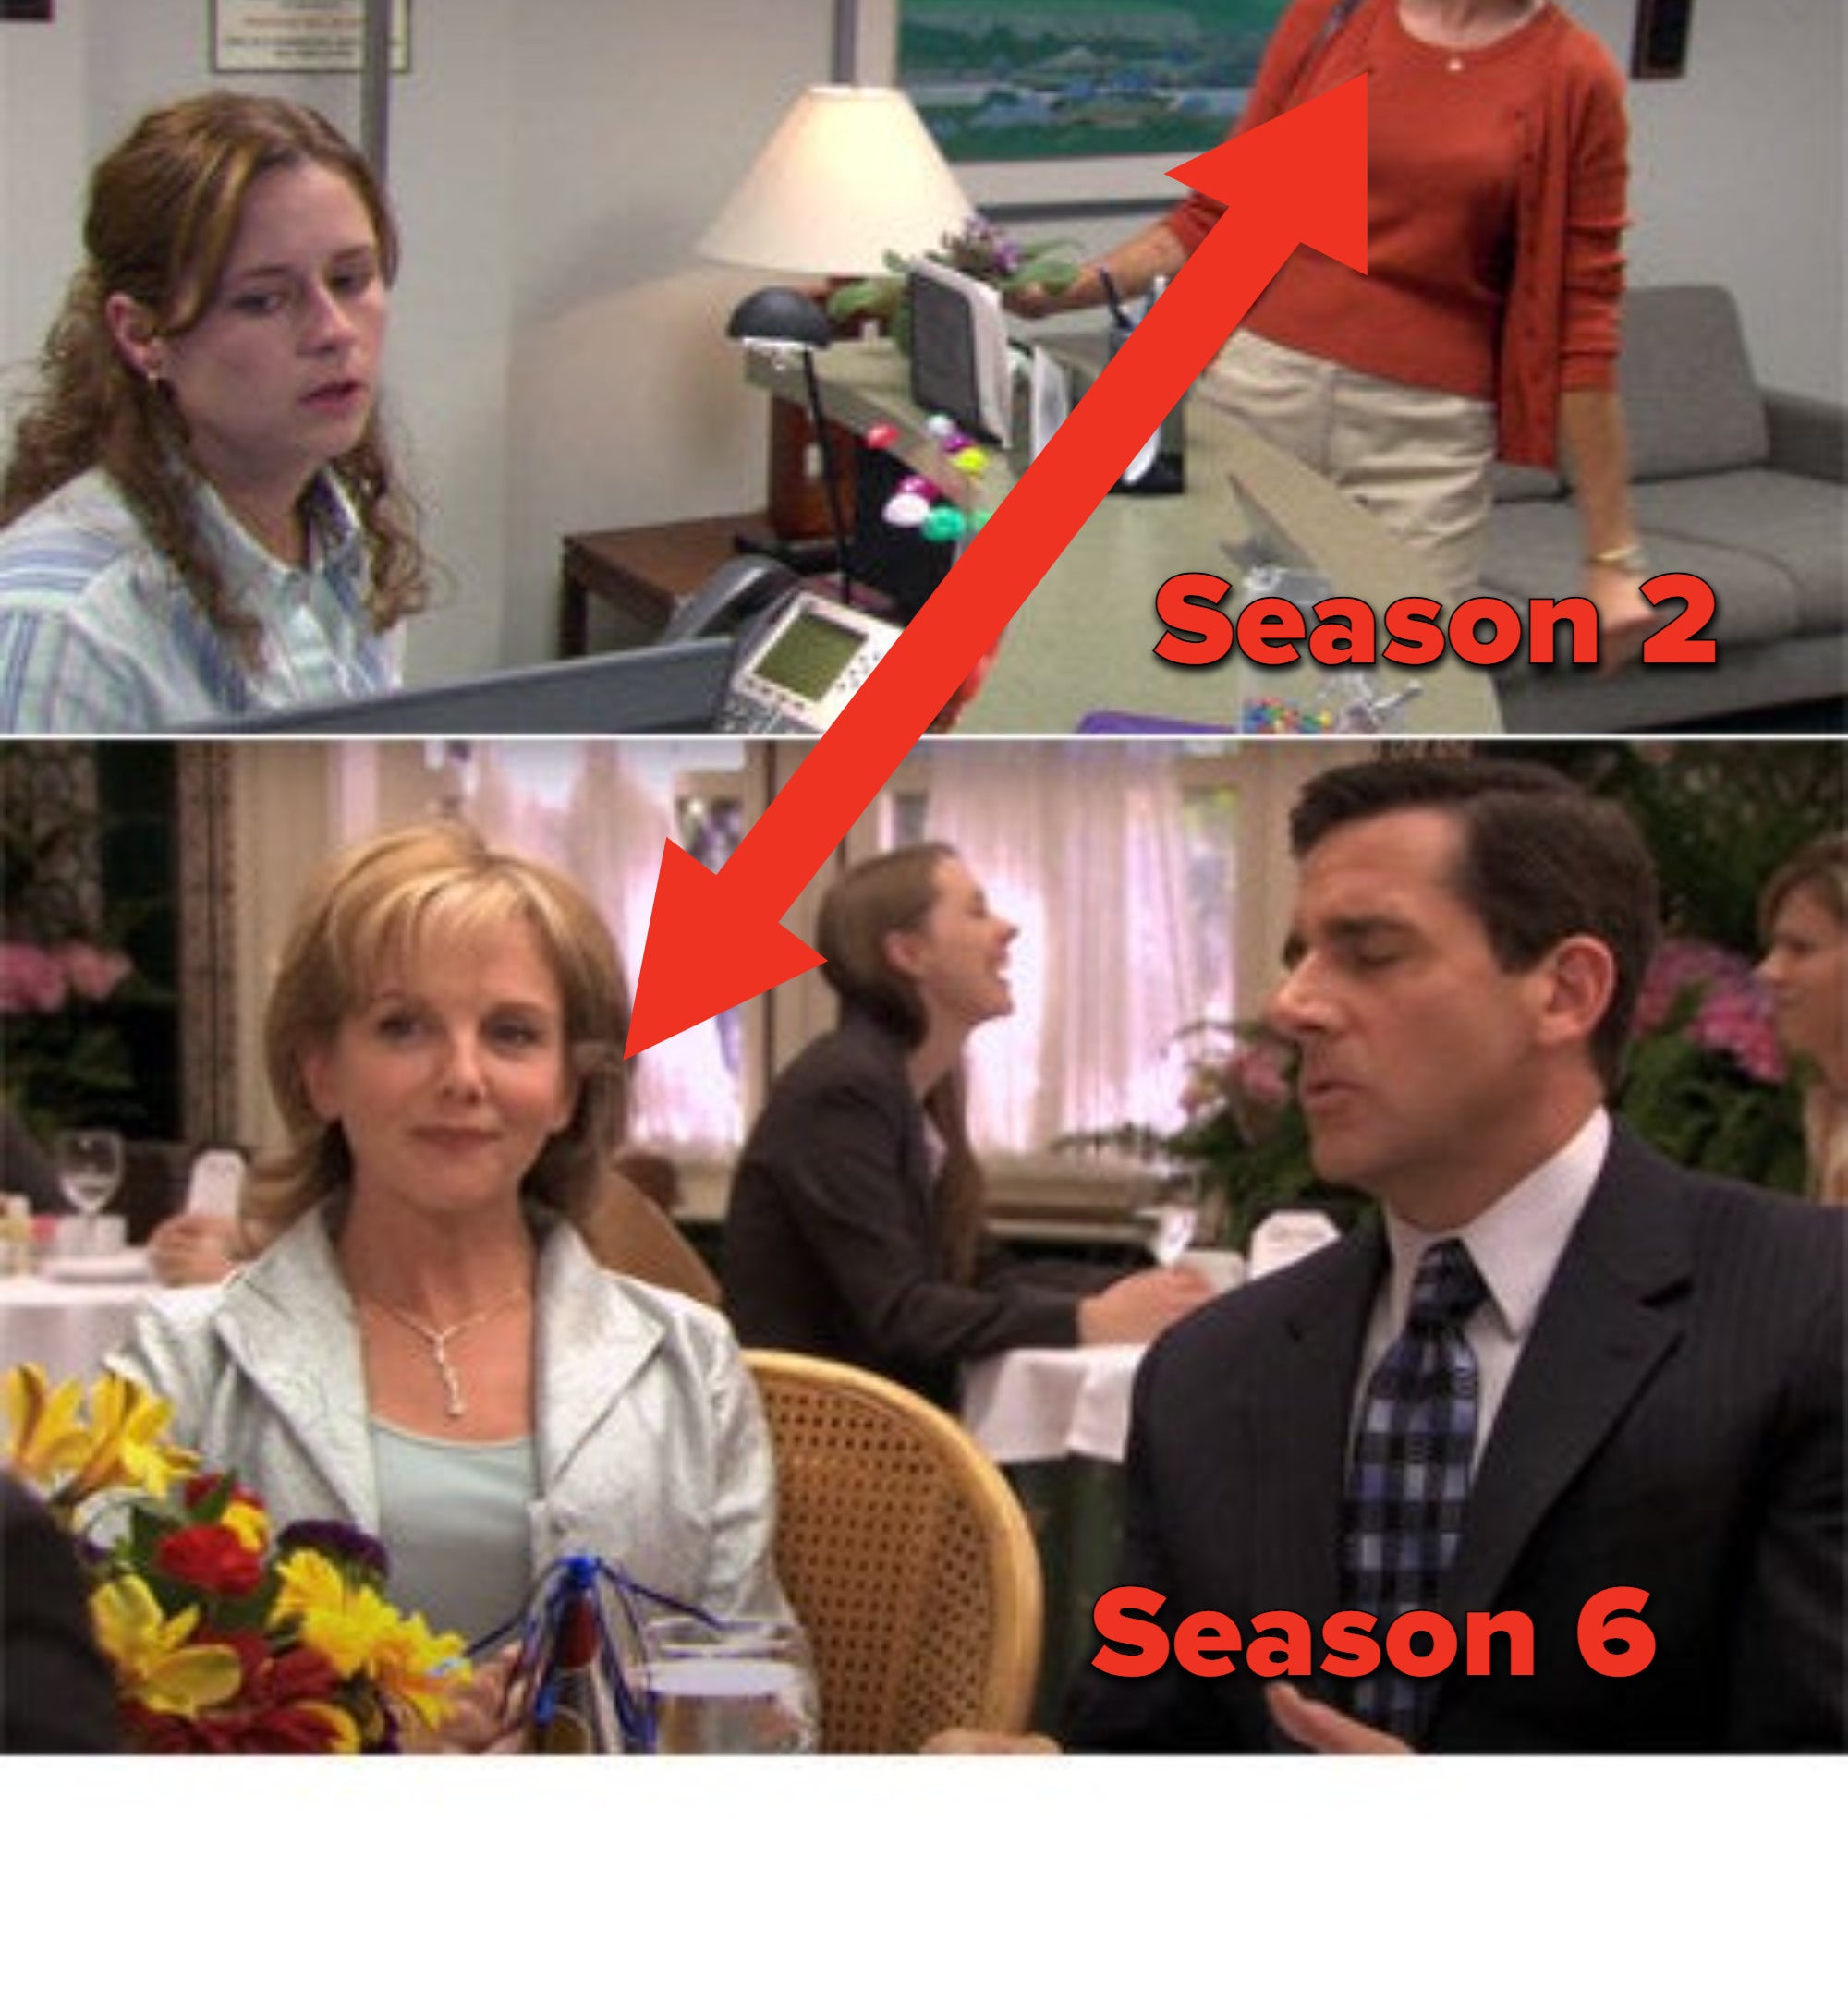 Pam&#x27;s mom in seasons 2 and 6 played by different actors